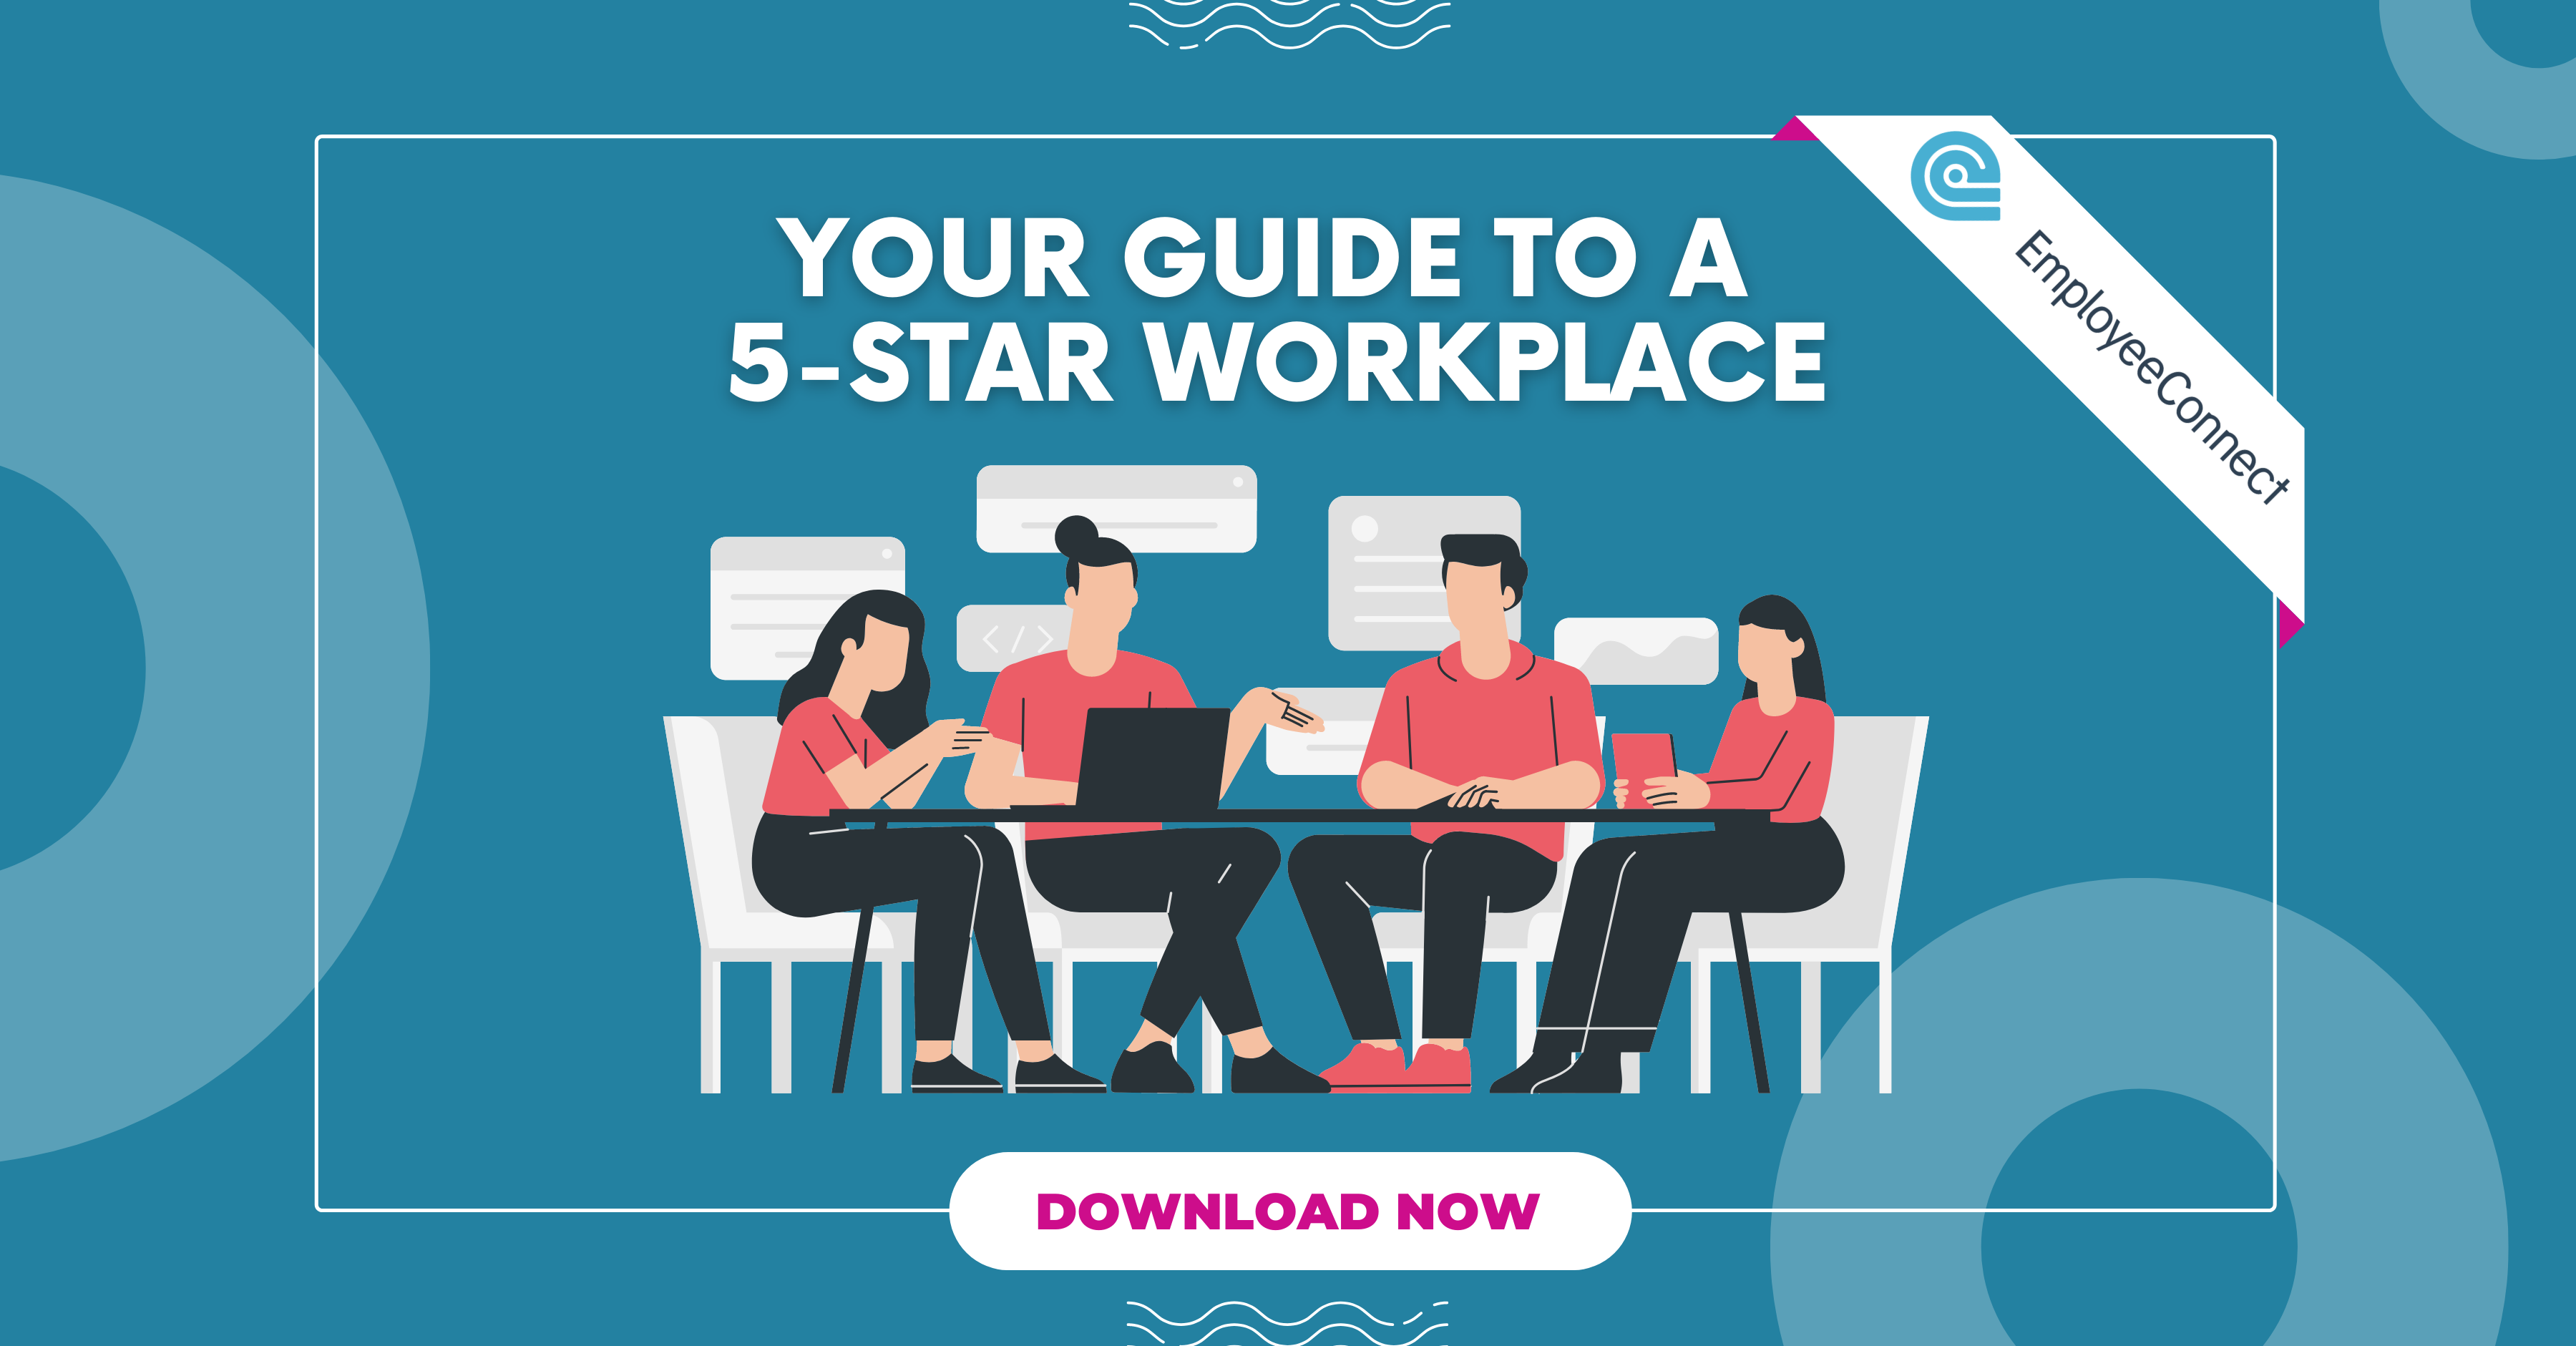 Your Guide to a 5-Star Workplace